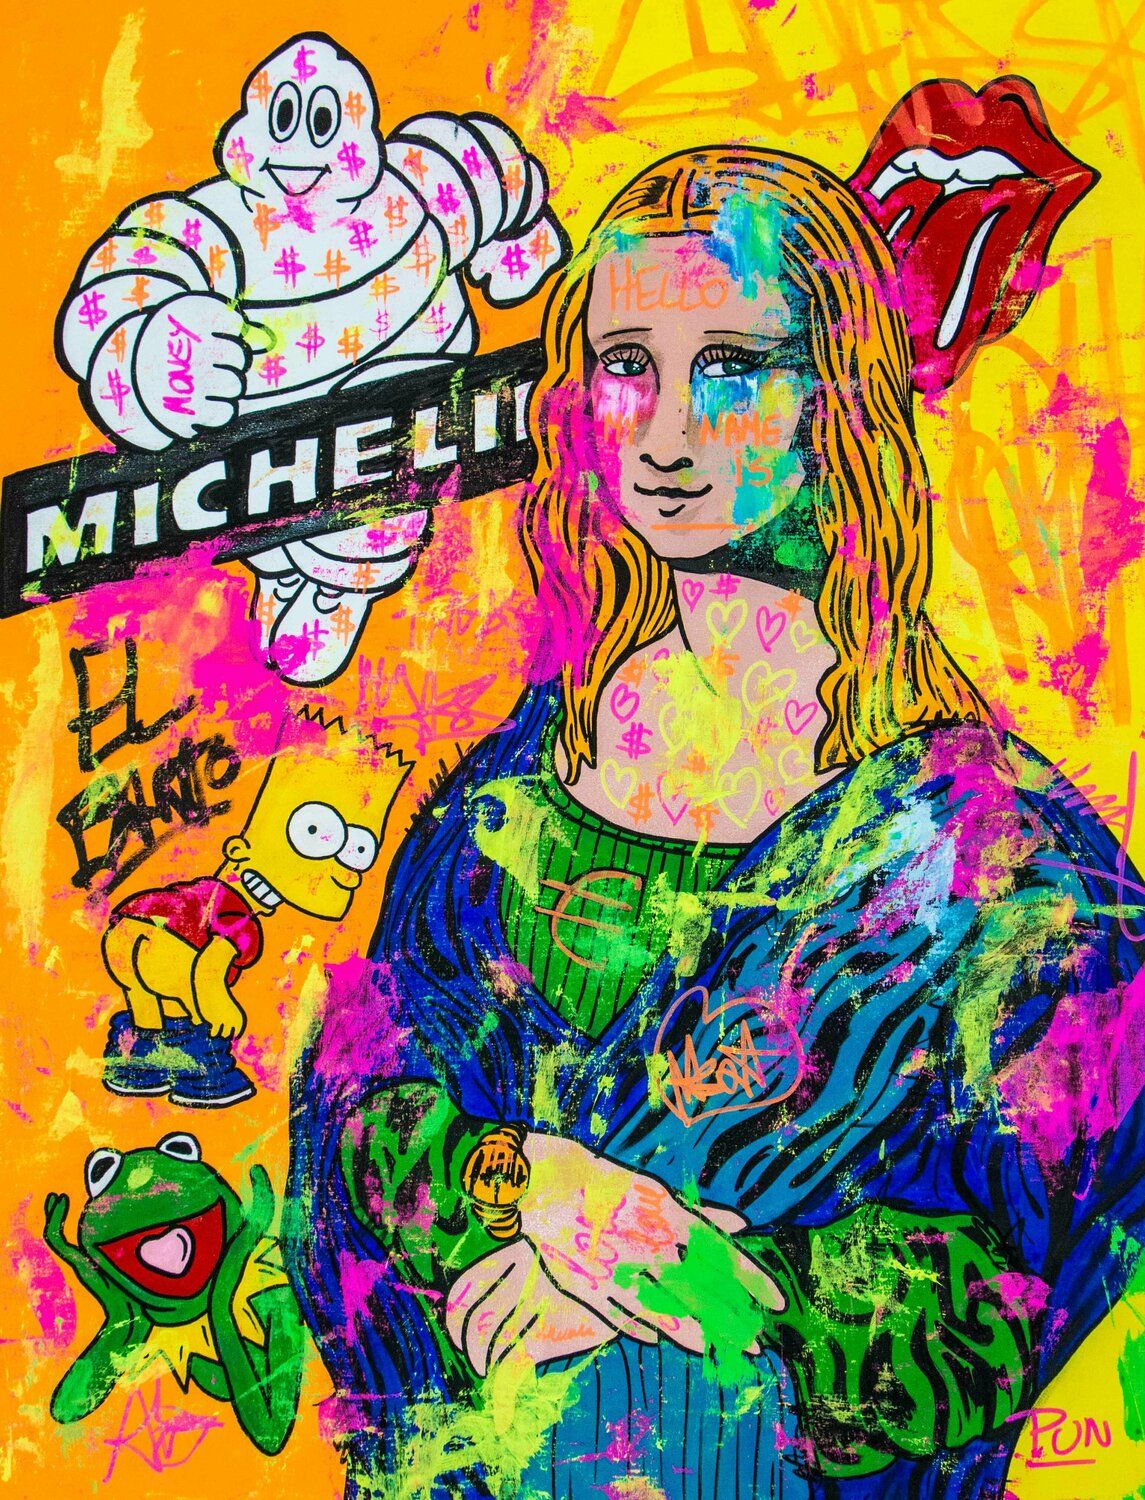 A pop art version of the Mona Lisa, with a neon sign in the background - Mona Lisa